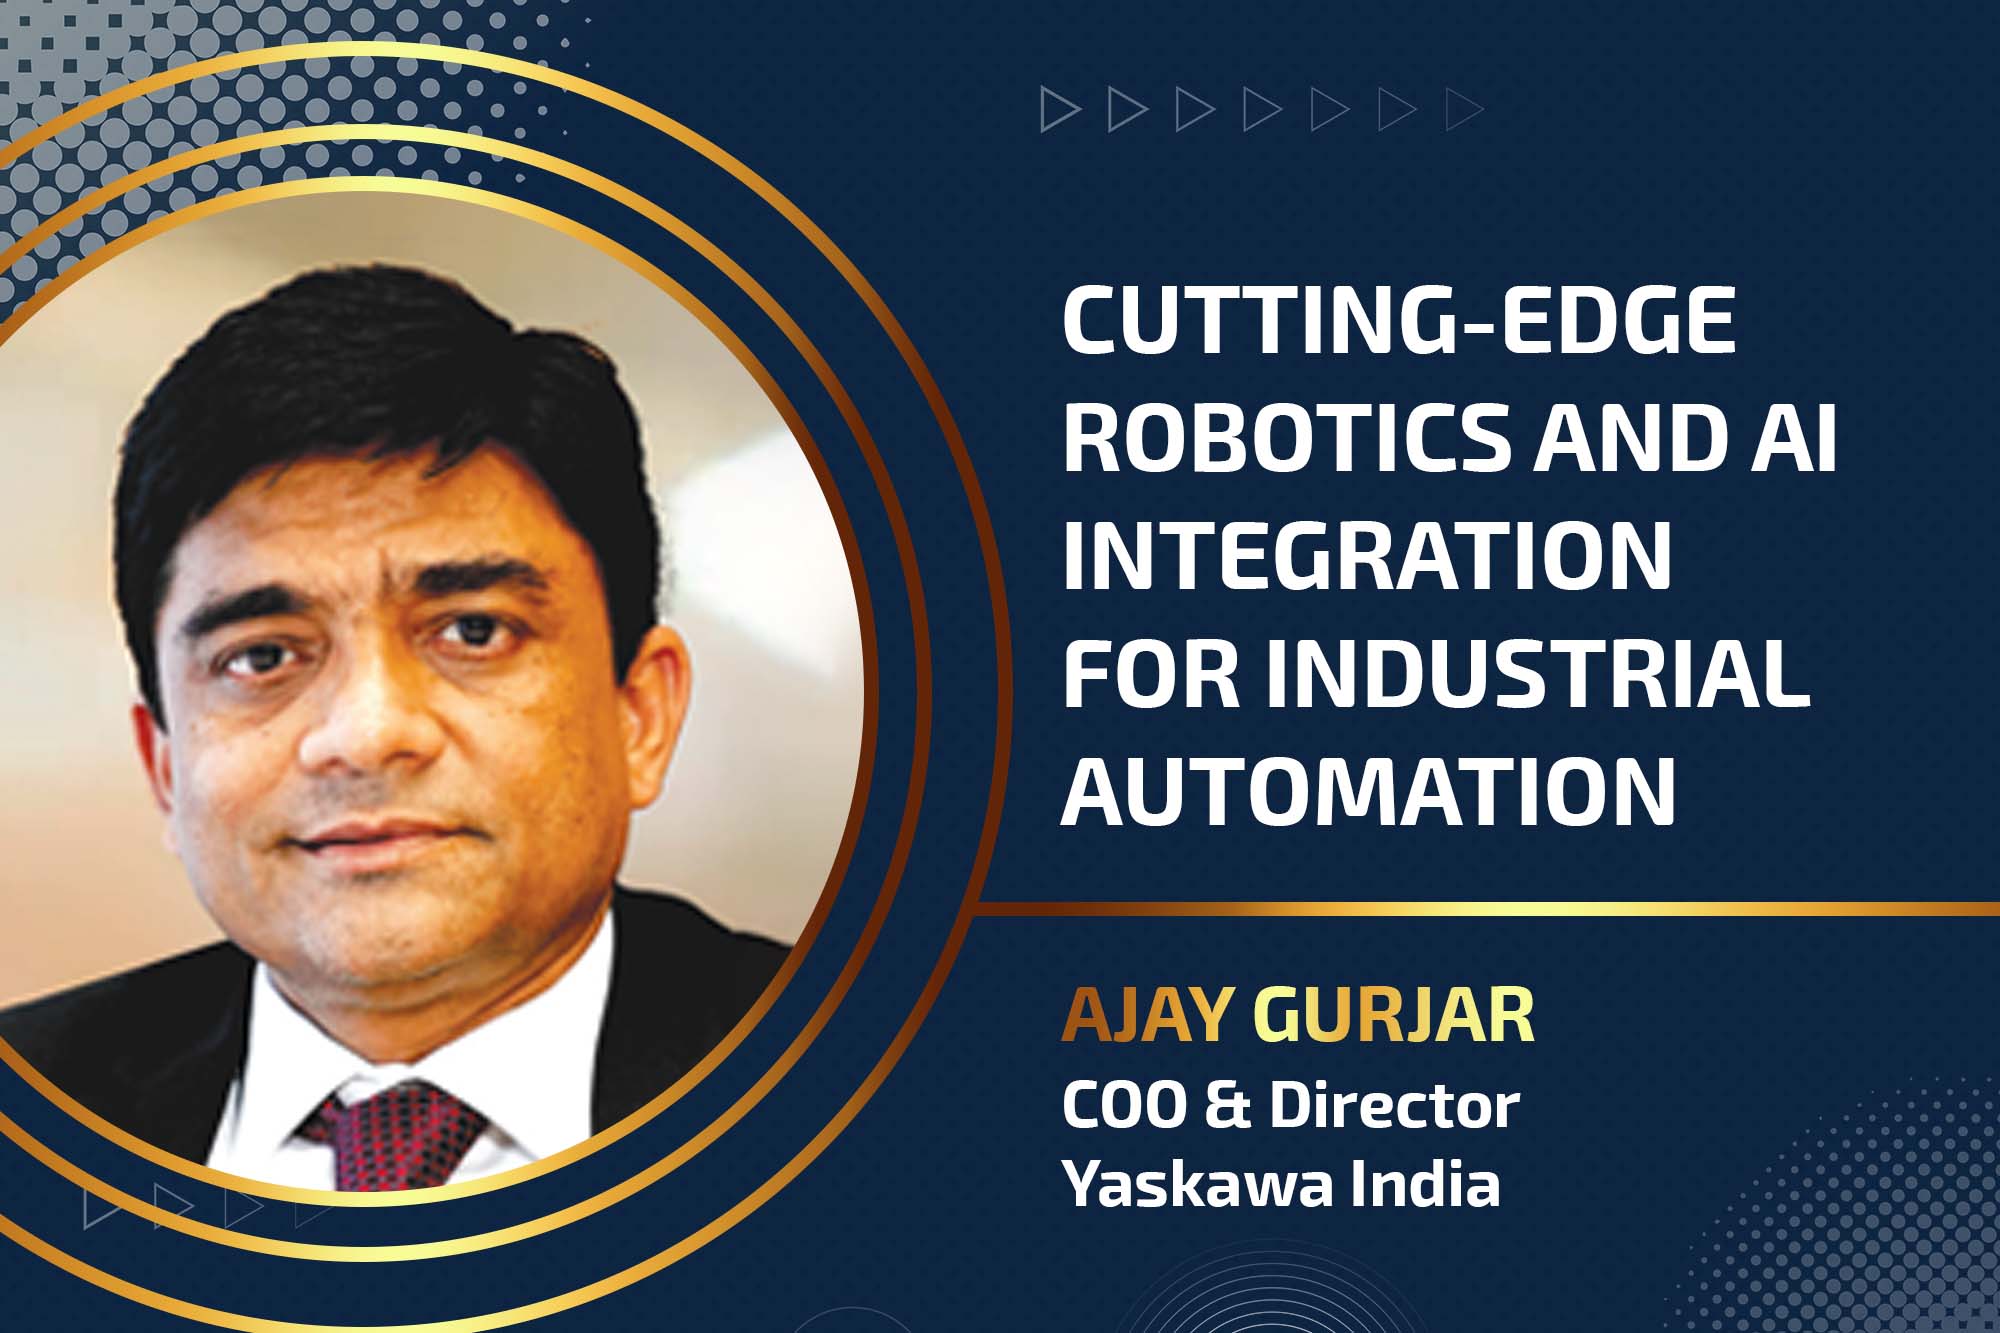 Cutting-edge robotics and AI integration for industrial automation  